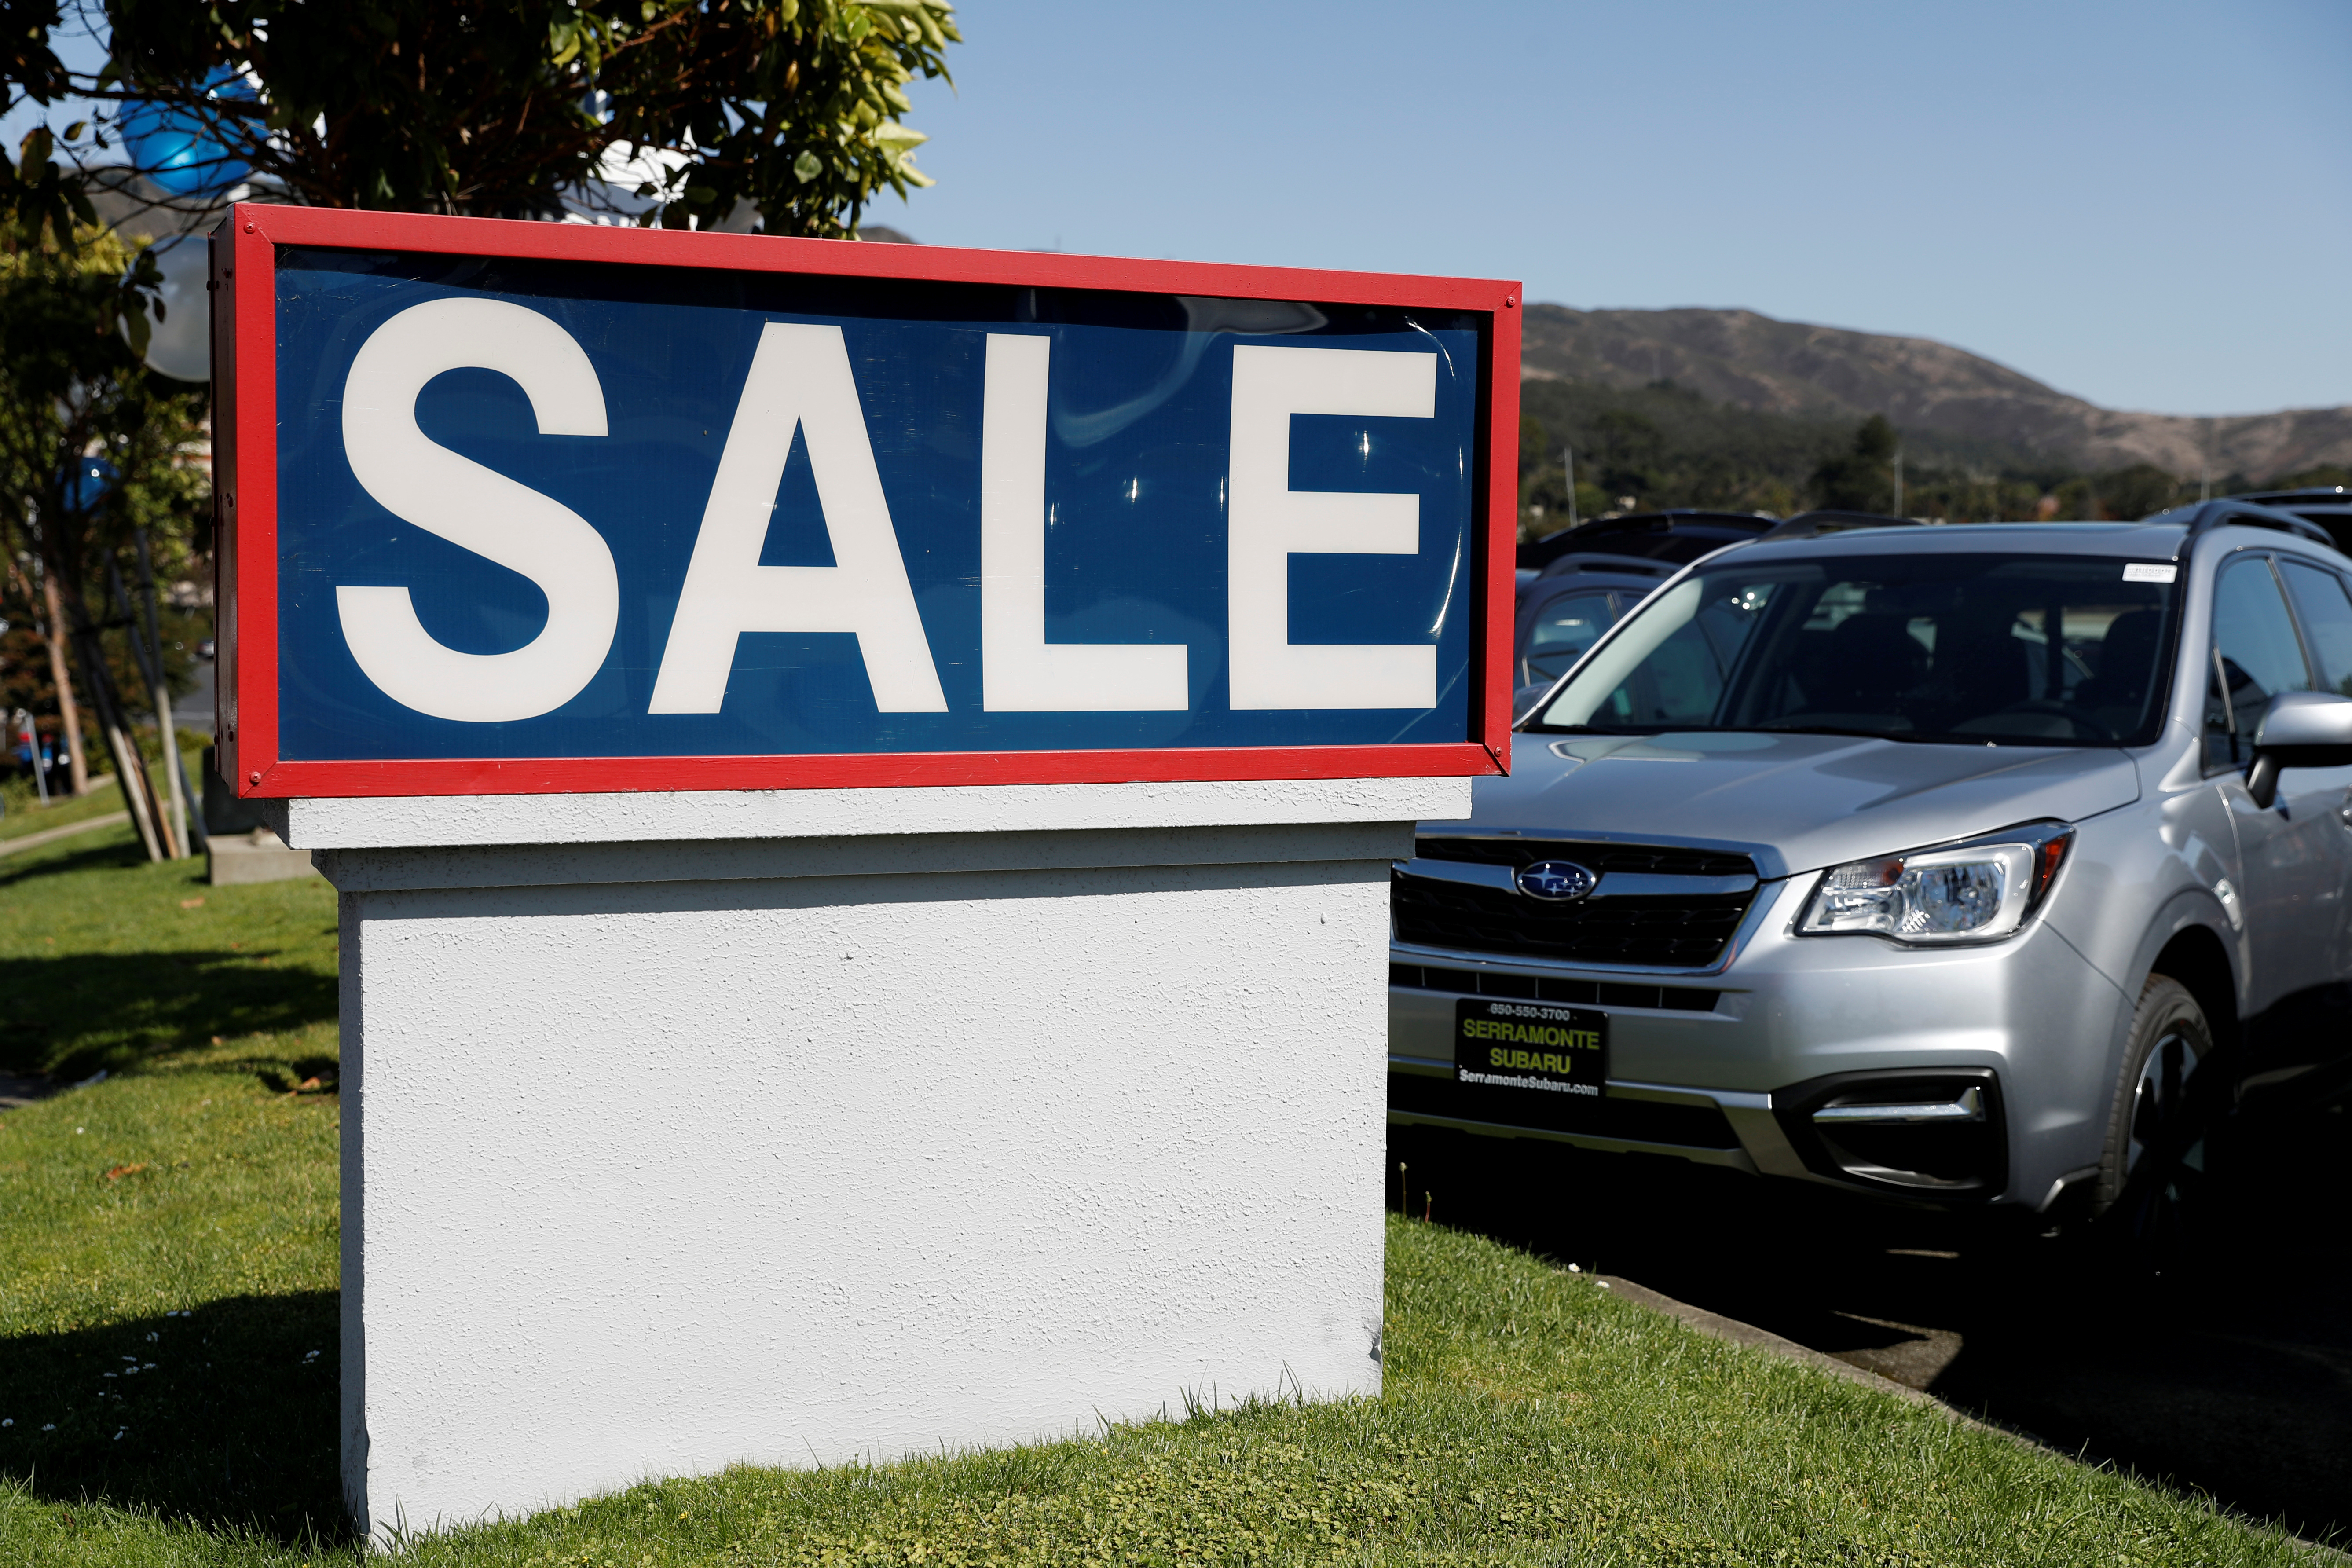 6 Car Dealers That Accept Bitcoin As A Form Of Payment - Retail News And Events